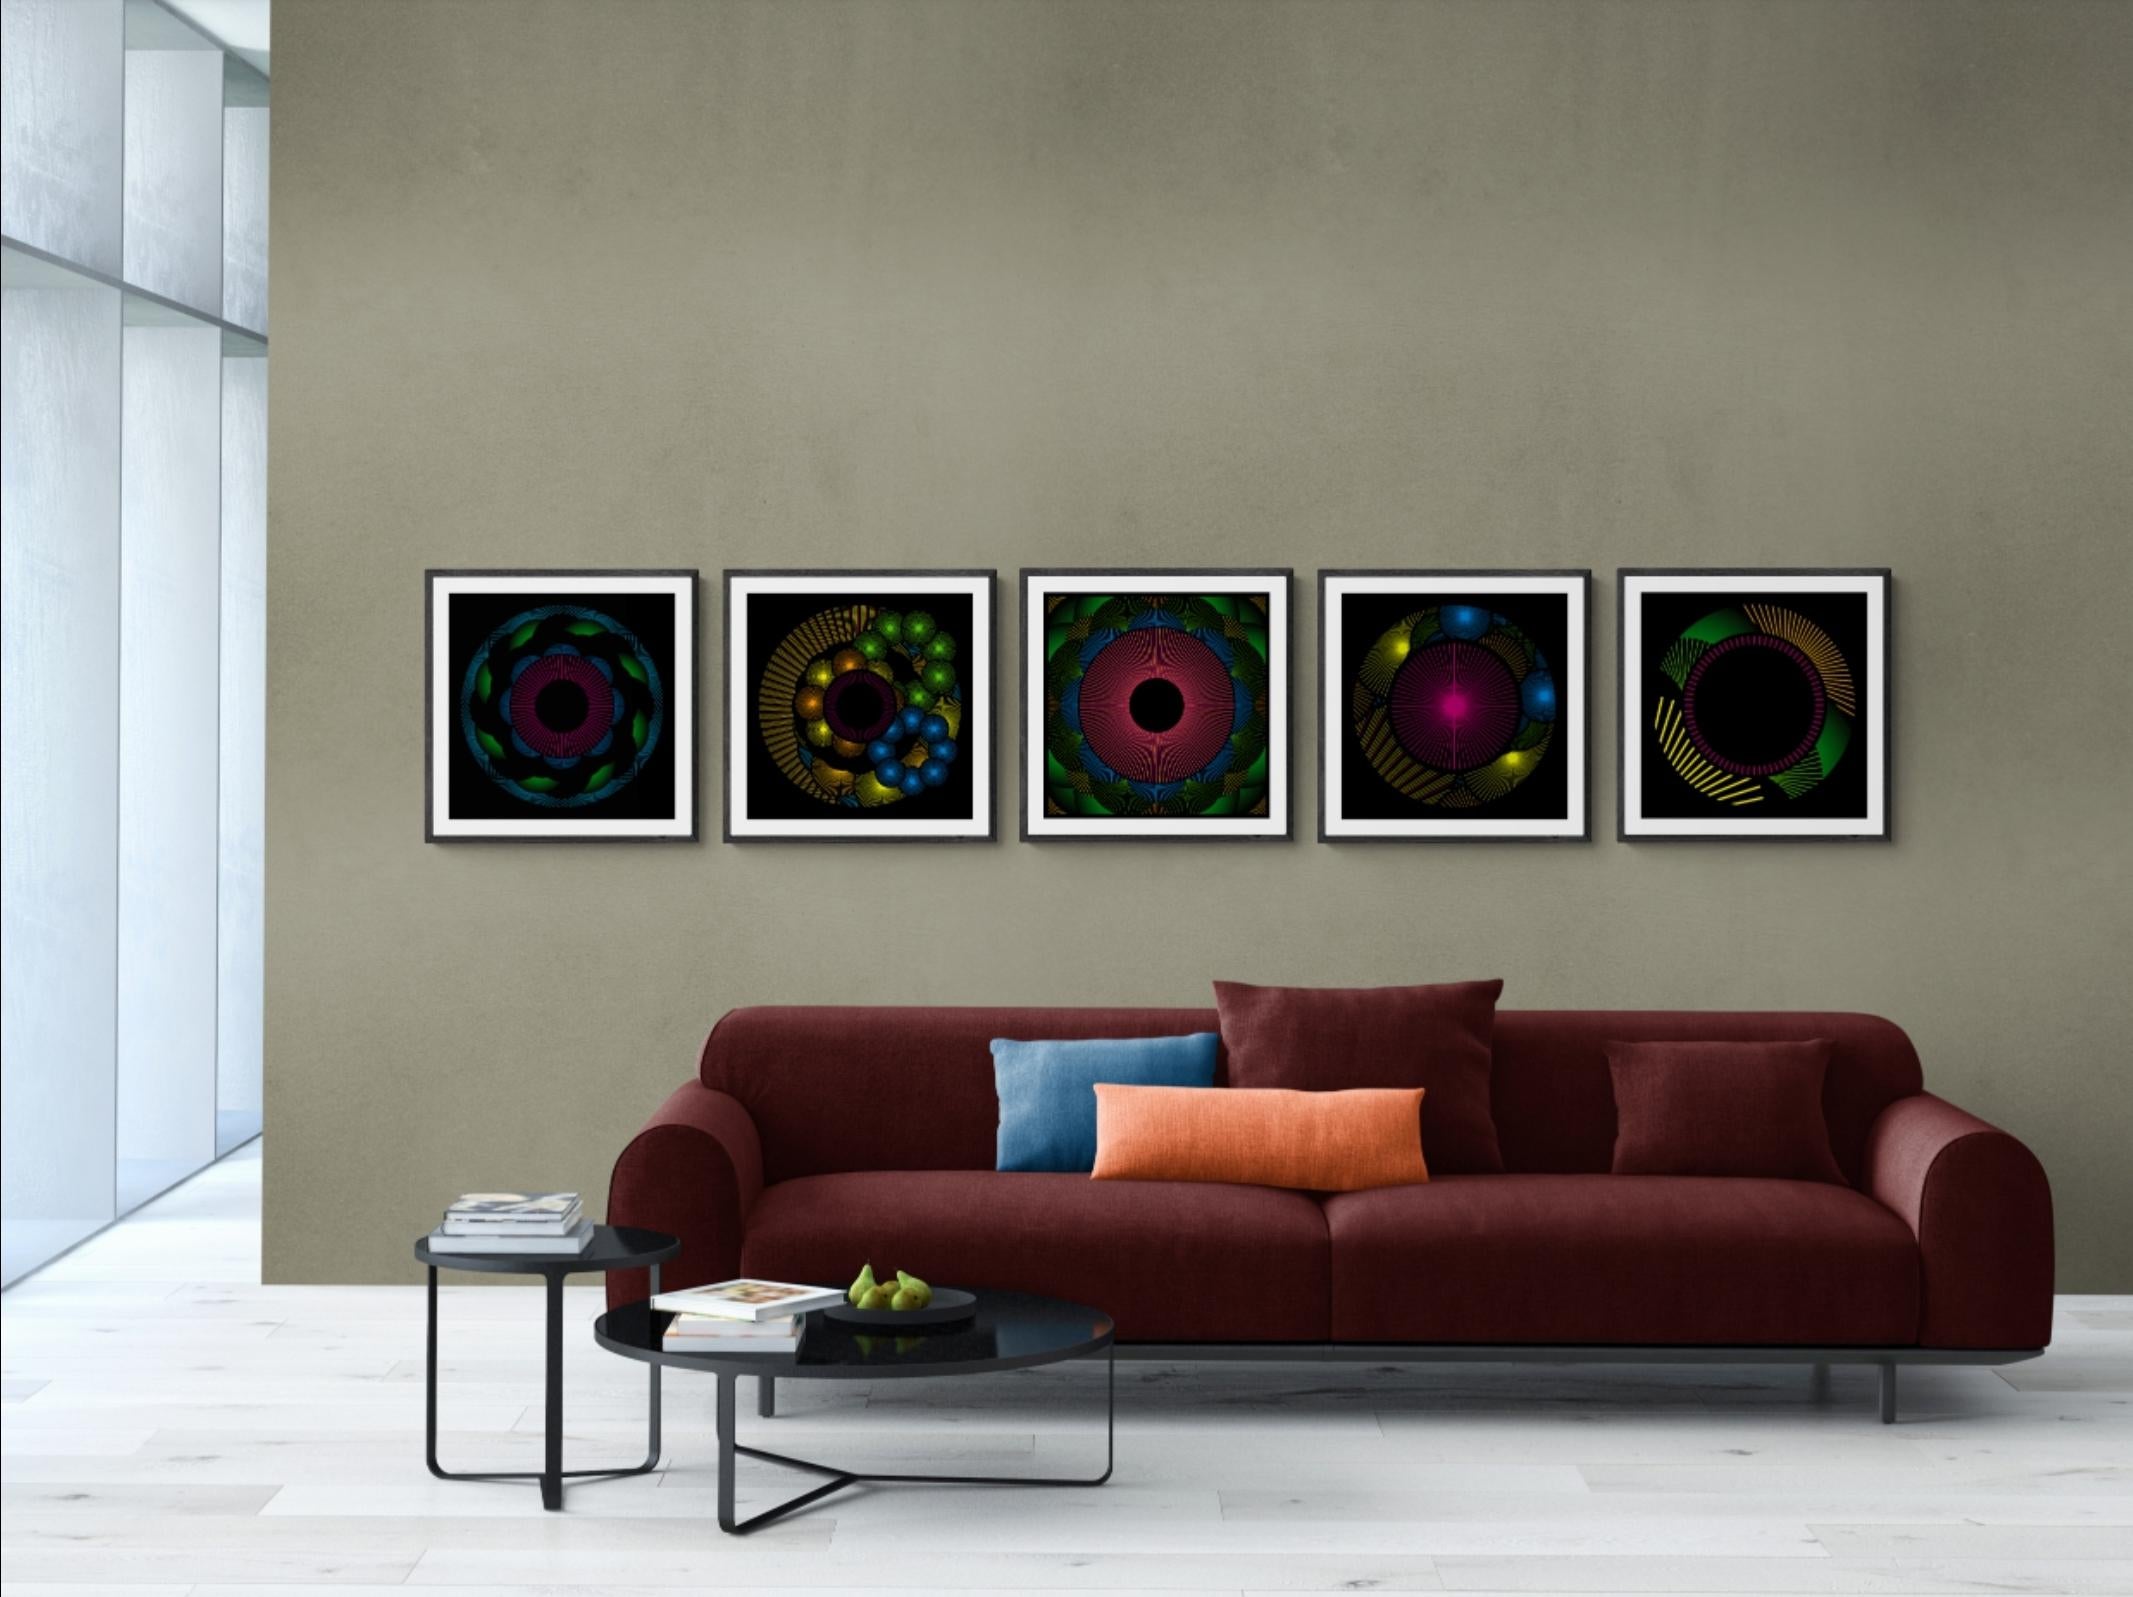 Nebulosa 25 - Black Abstract Print by Julio Campos